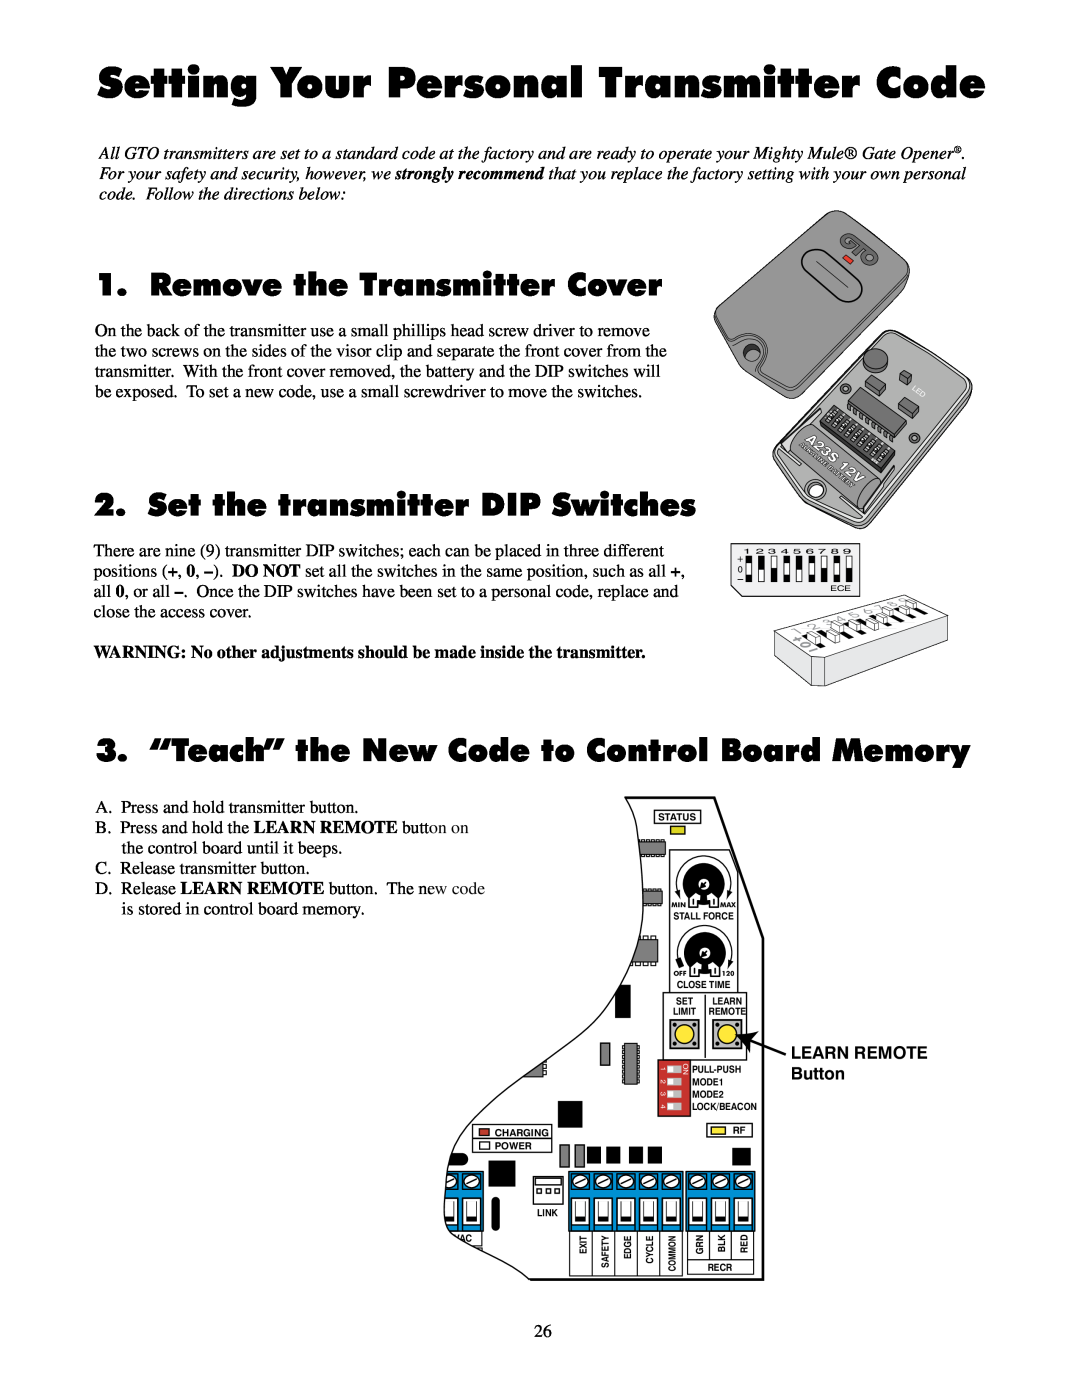 GTO UL325 SERIES Setting Your Personal Transmitter Code, Remove the Transmitter Cover, Set the transmitter DIP Switches 